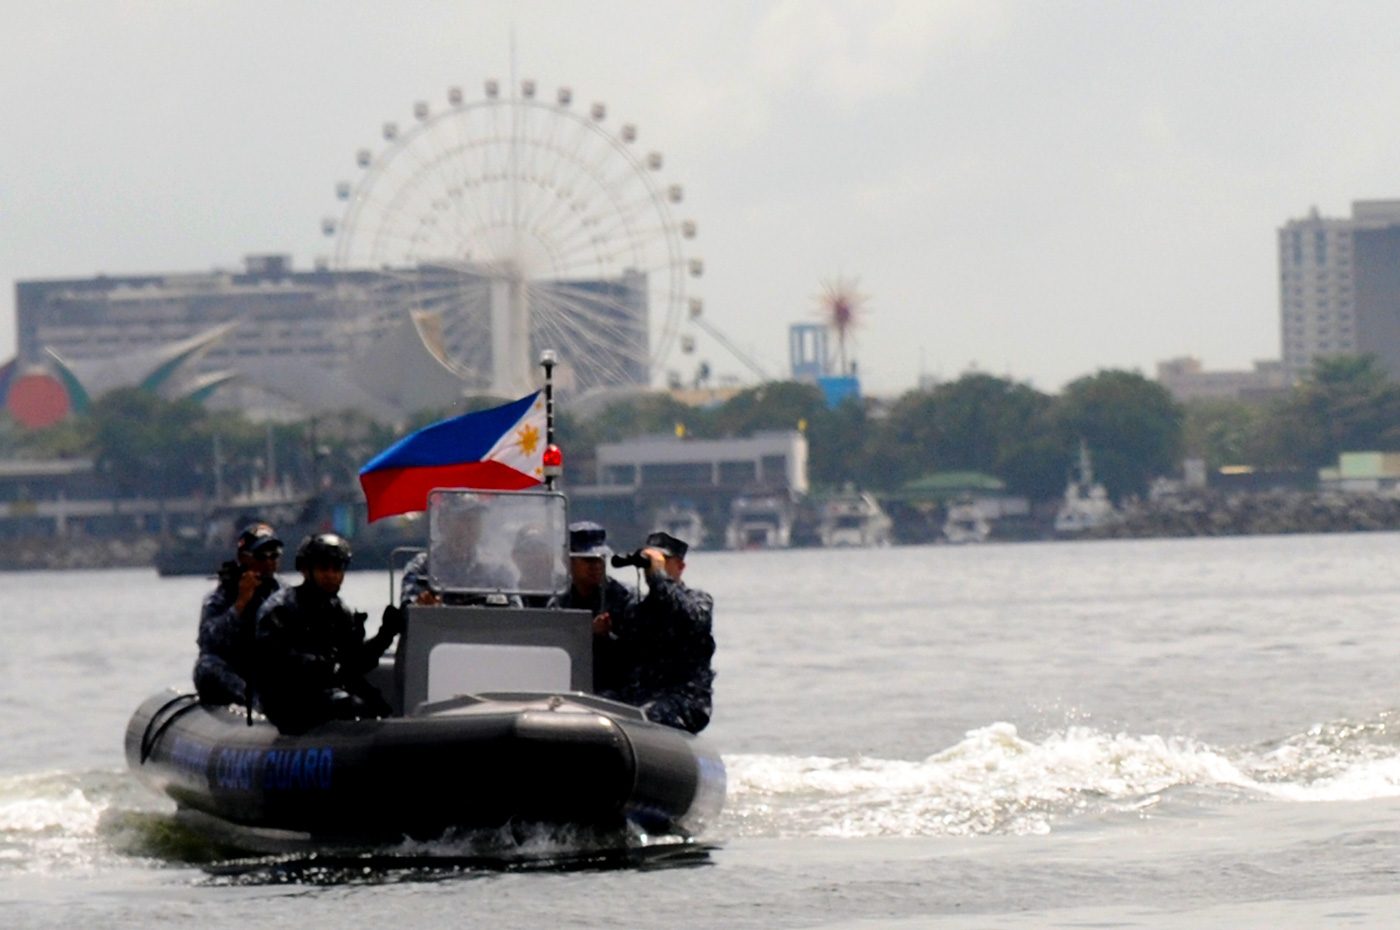 PATROL. Members of the Philippine Coastguard Special Operations Group patrol the Manila Bay coastline as they implement the strict no sail and no fishing zones during the 31st ASEAN Summit and Related Summits on November 7, 2017. Photo by Ben Nabong/Rappler 